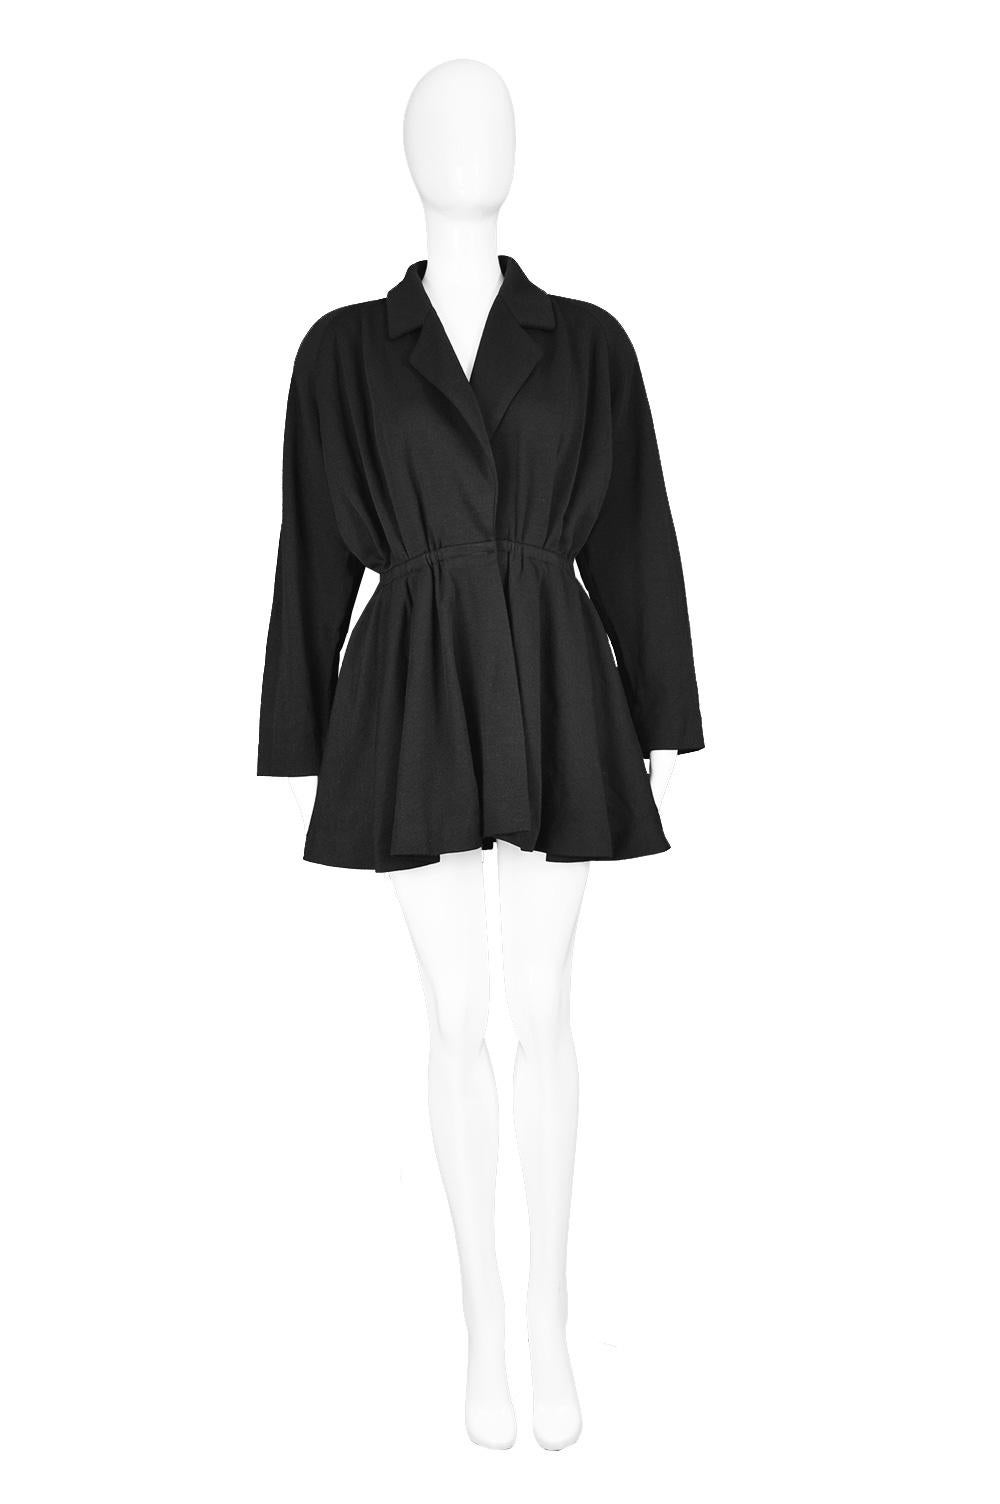 Donna Karan for Bergdorf Vintage Black Wool Structured Shoulder Jacket, 1980s

Click 'CONTINUE READING' below to see size & description. 

An incredible vintage women's jacket from the 80s by luxury American fashion designer, Donna Karan. Originally